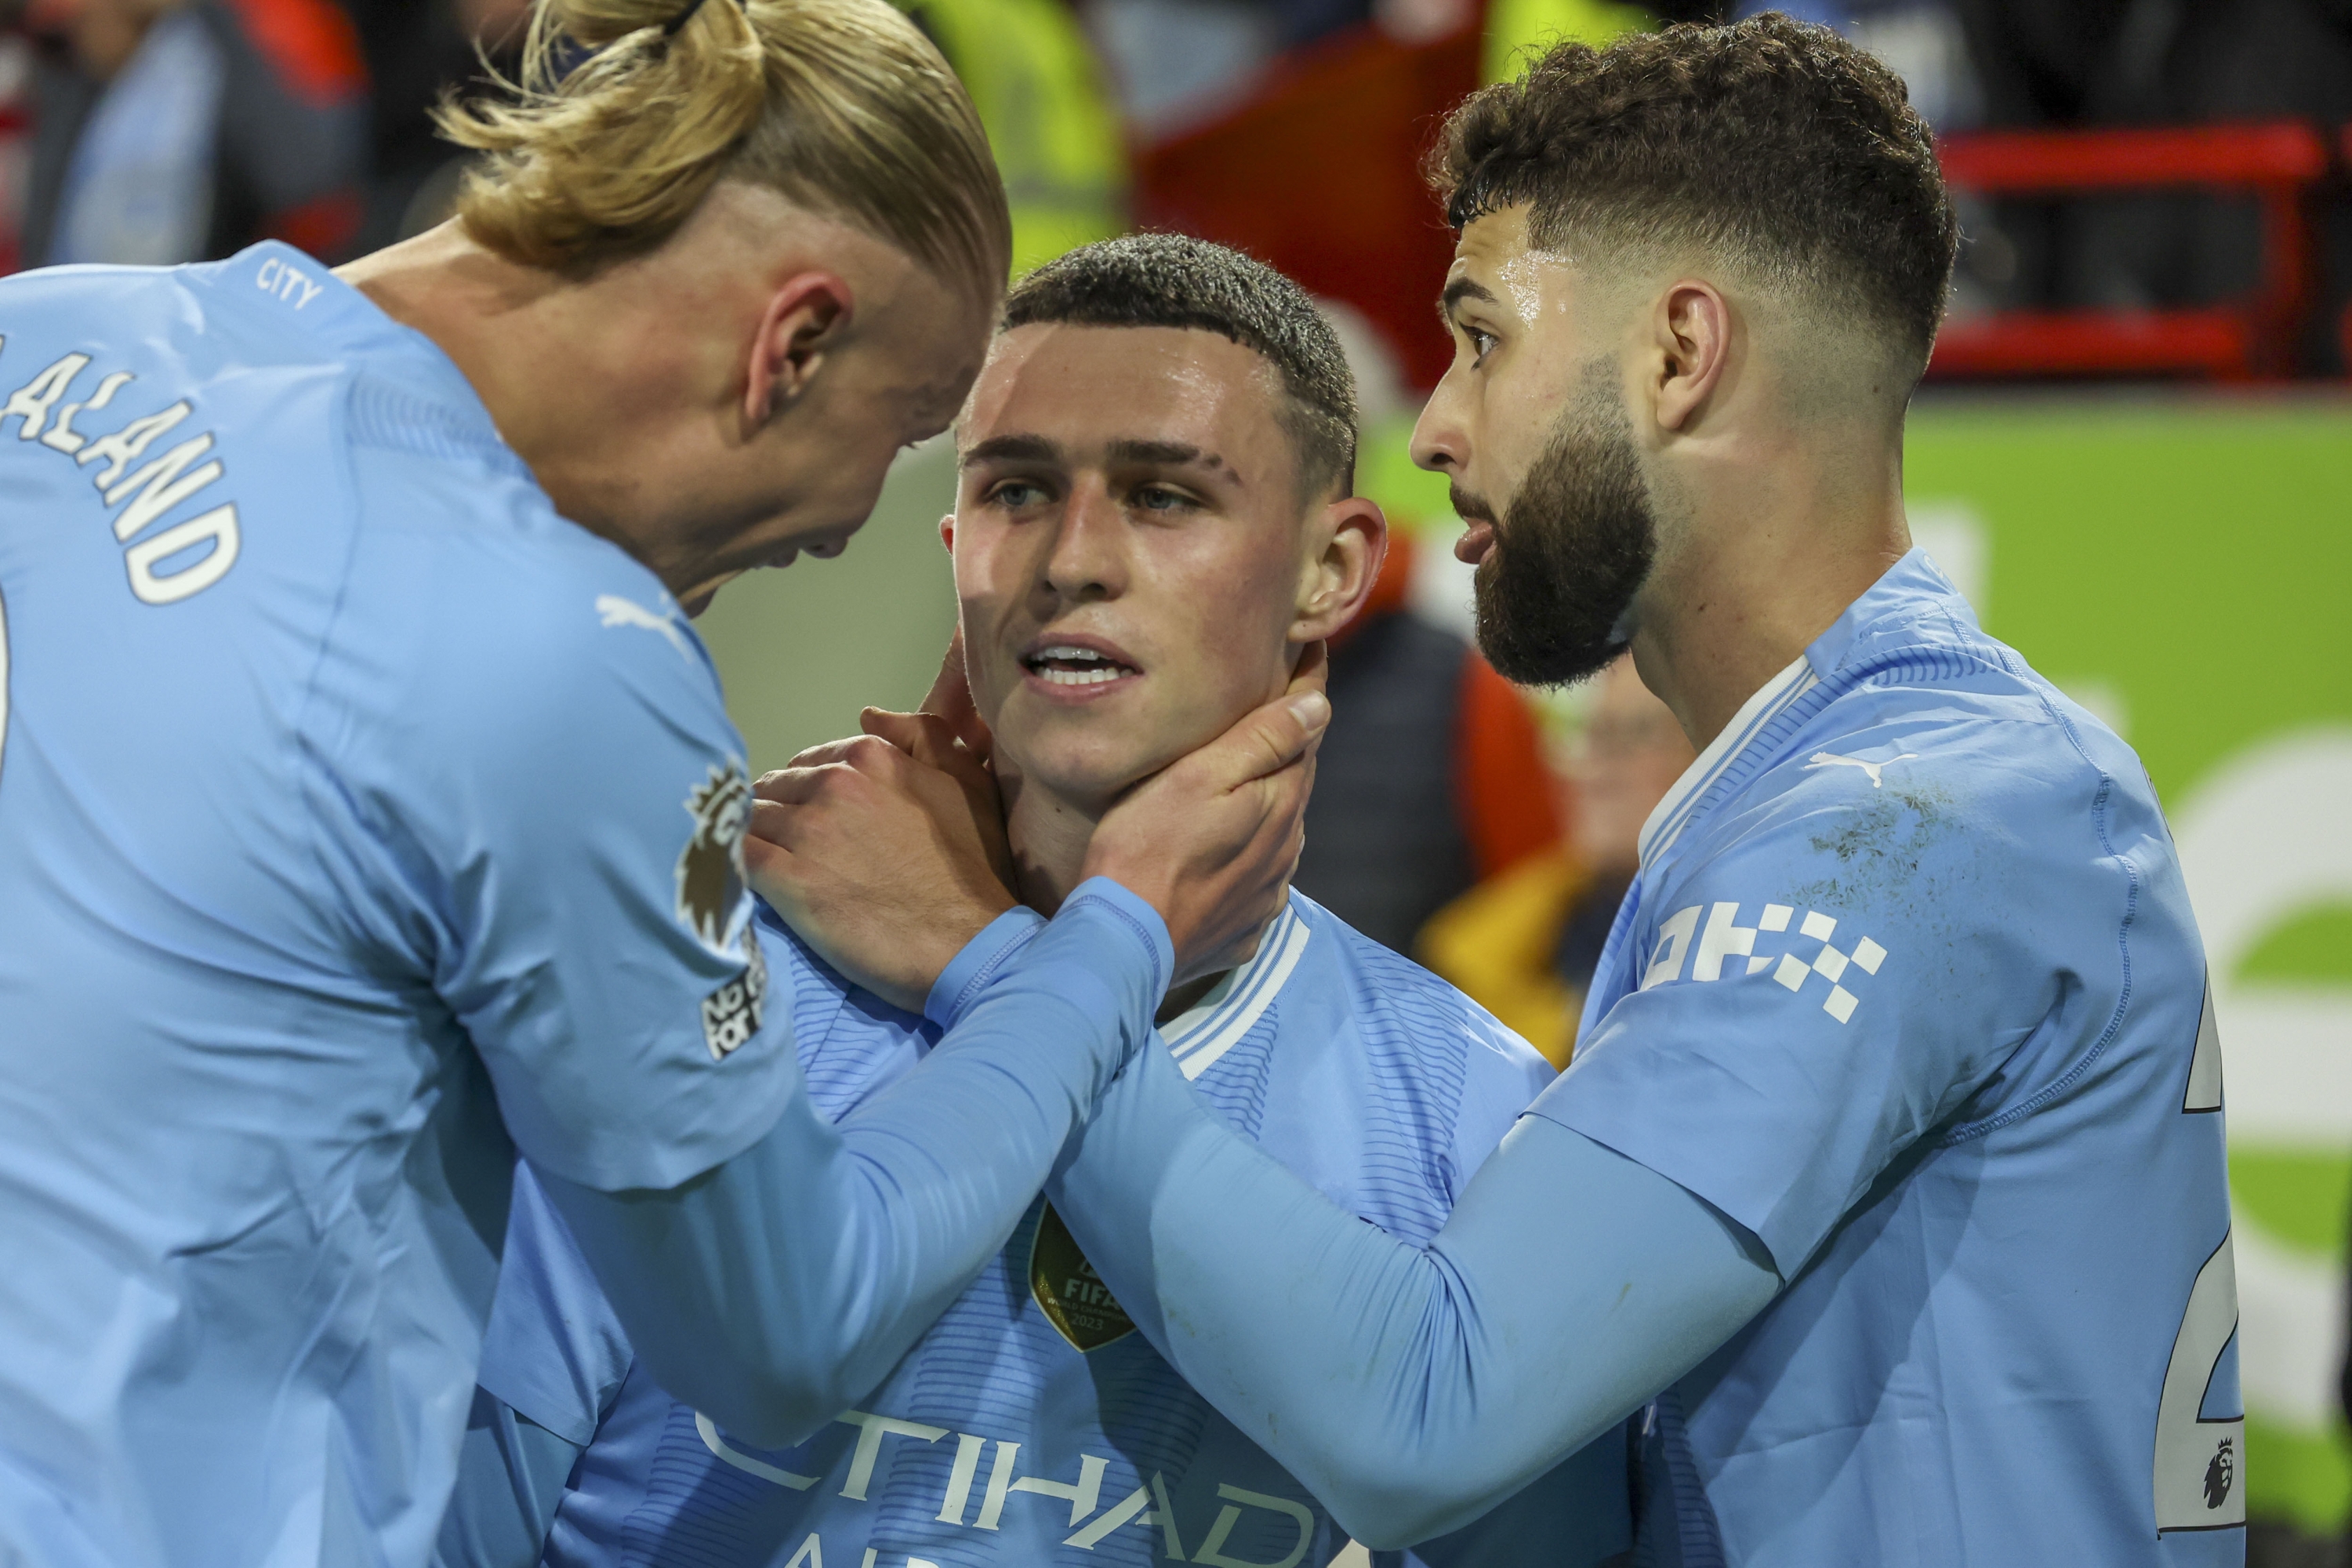 Manchester City's Phil Foden, center, celebrates eith Manchester City's Erling Haaland, left, and Manchester City's Josko Gvardiol after scoring his side's third goal during the English Premier League soccer match between Brentford and Manchester City at the Gtech Community Stadium in London, Monday, Feb. 5, 2024. (AP Photo/Ian Walton)